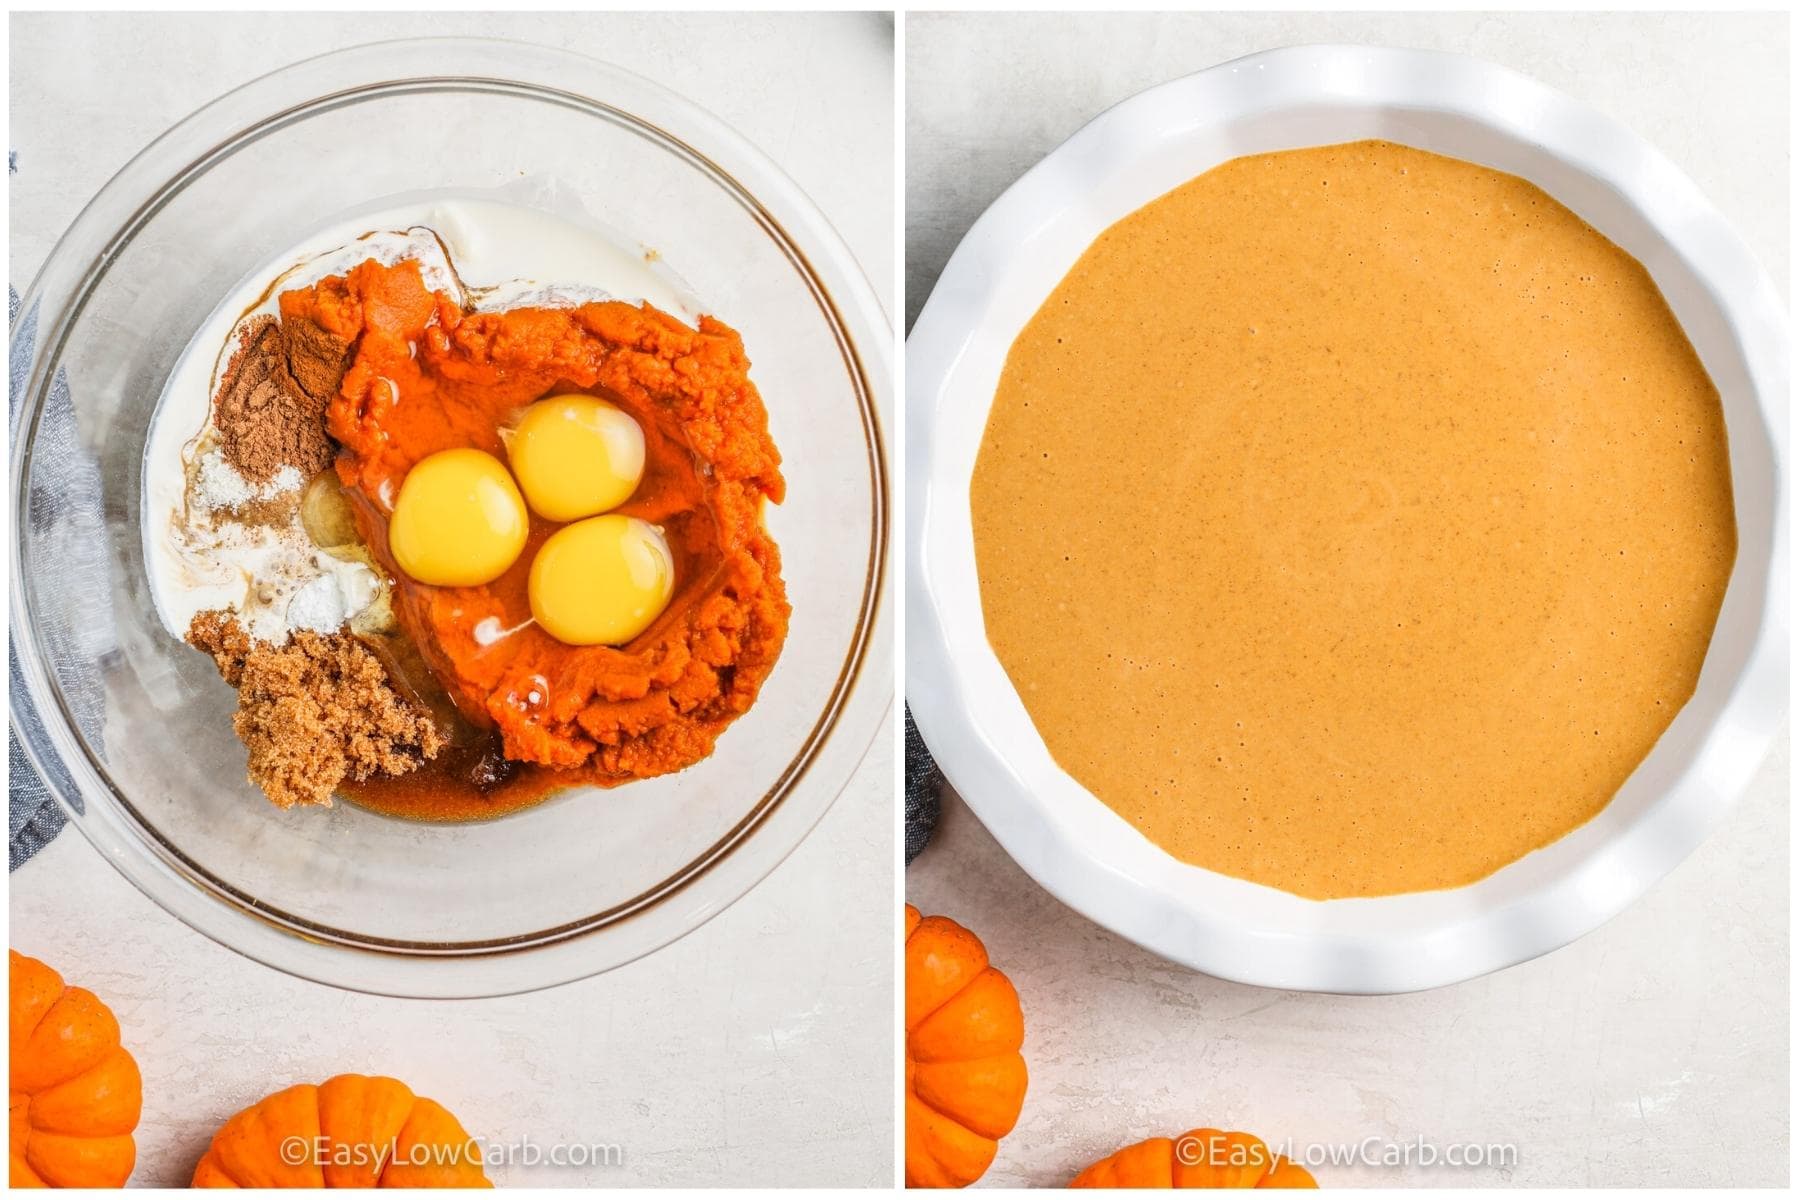 process of mixing and adding ingredients to dish to make Keto Pumpkin Pie Recipe